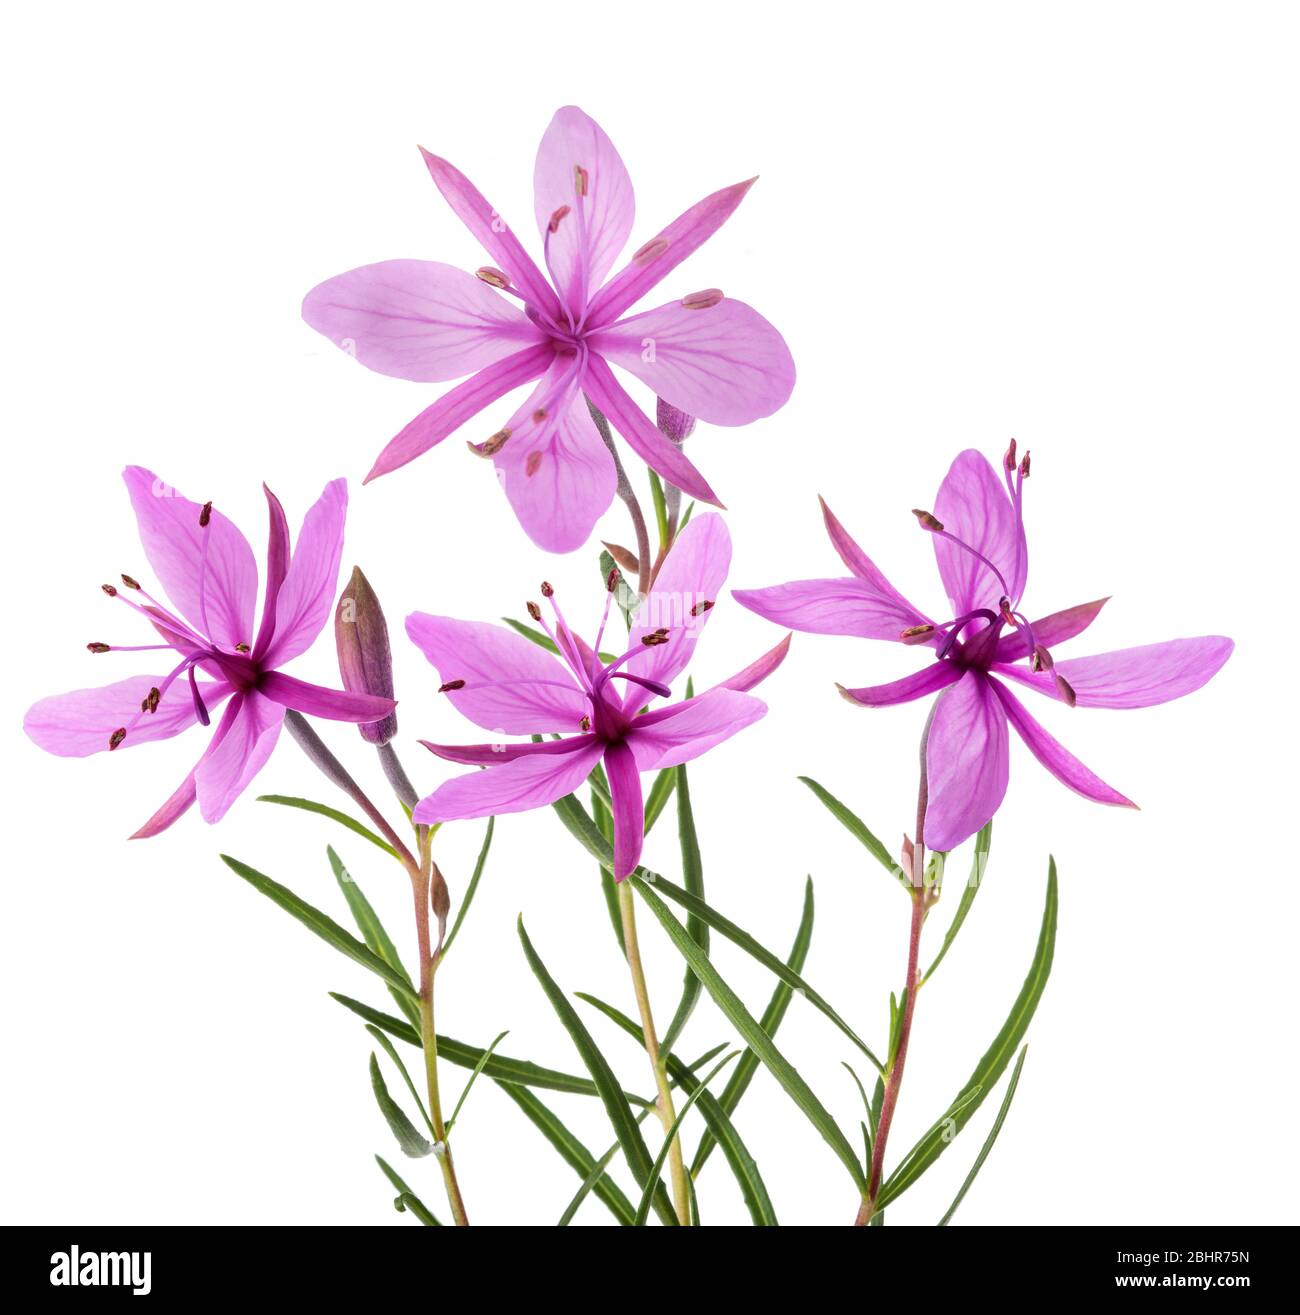 Pink Alpine willowherb flowers isolated on white Stock Photo